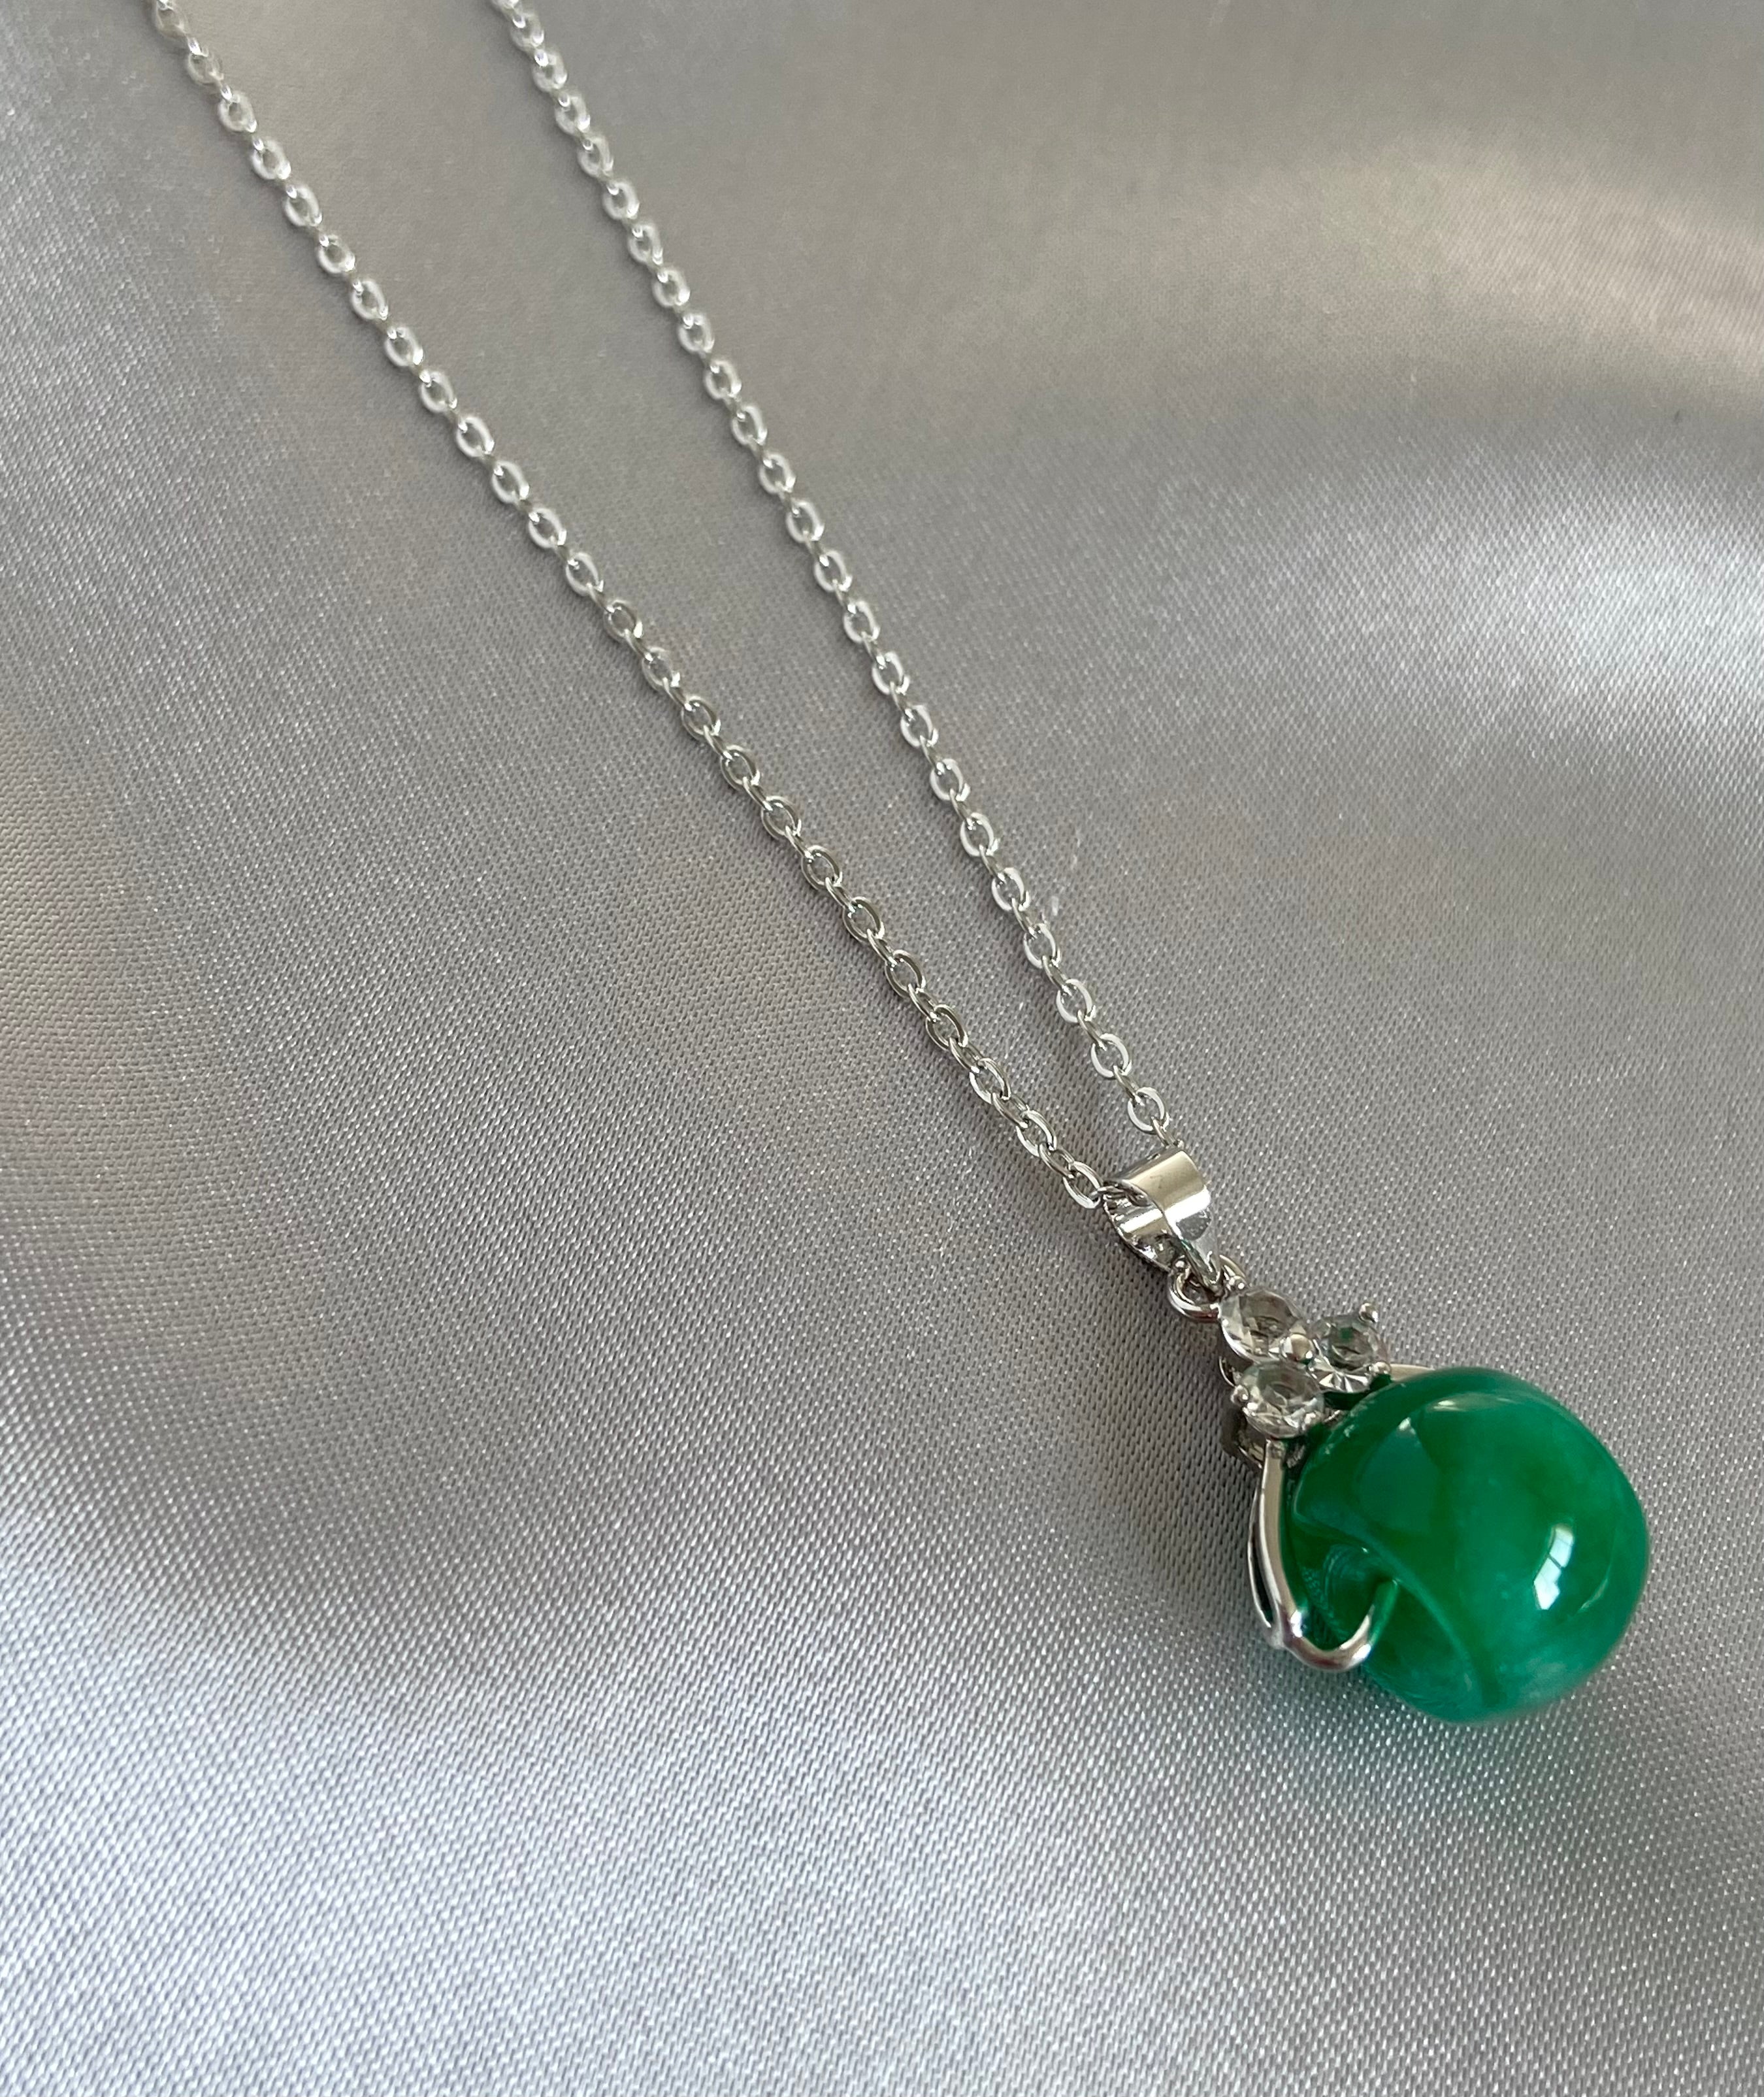 Custom Wire Wrapped Siberian Jade Necklace/Pendant Sterling Silver –  Treasure Tree Wire Wrapped Jewelry